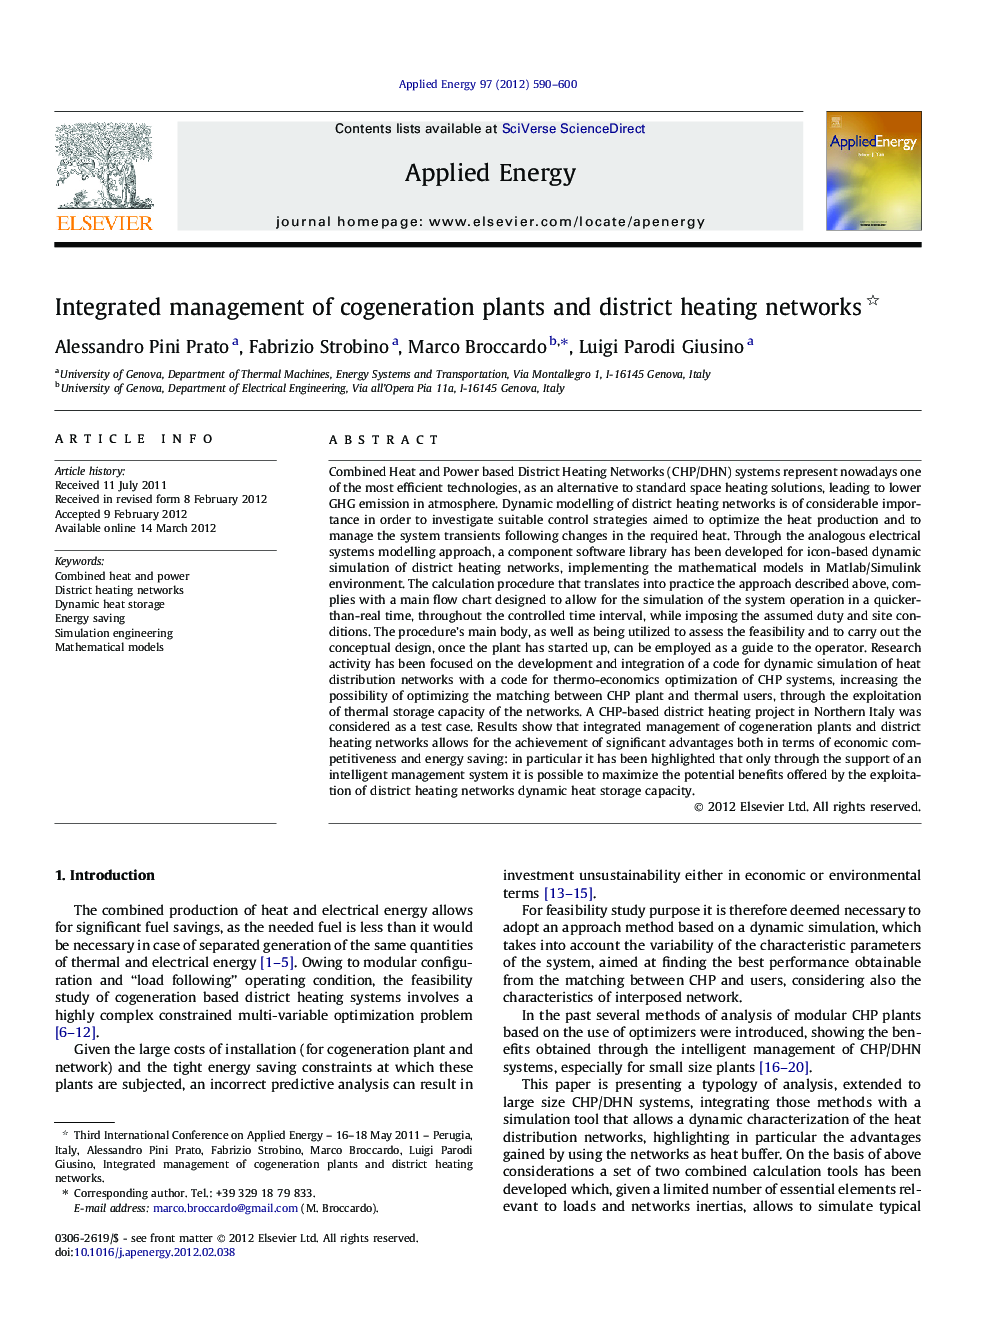 Integrated management of cogeneration plants and district heating networks 